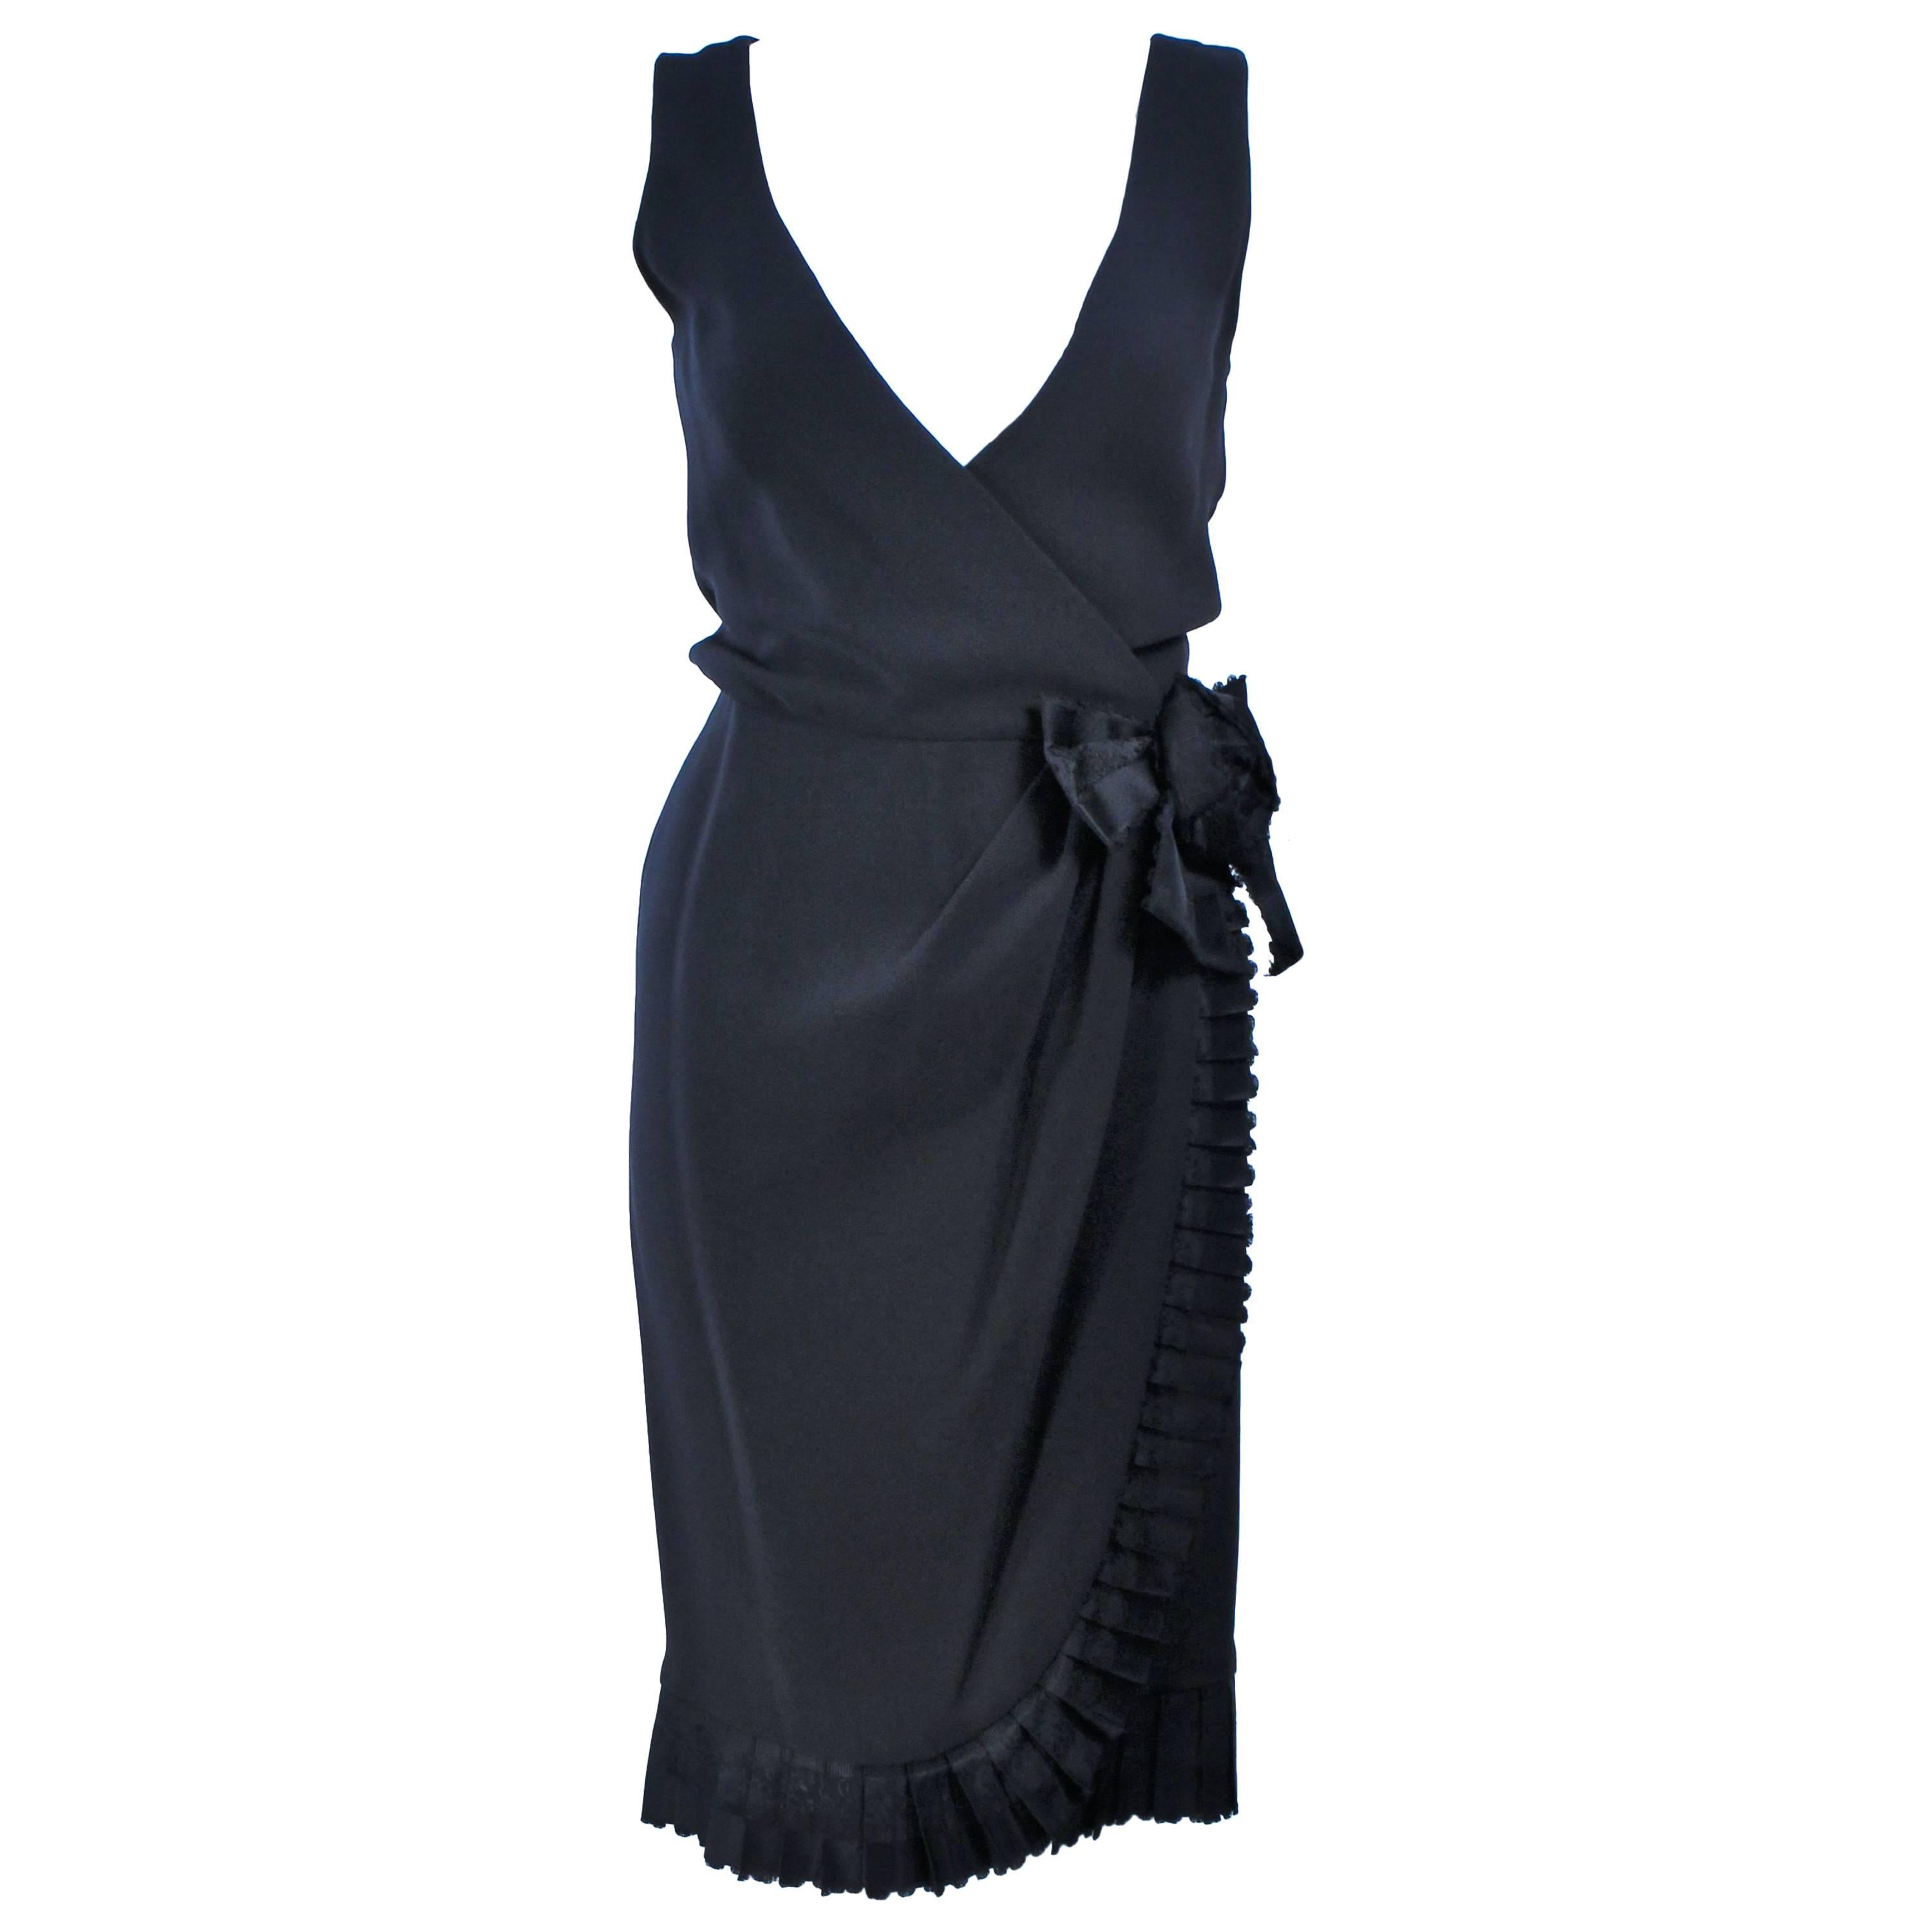 BILL BLASS Black Silk Cocktail Draped Dress with Rose Detail Size 2 For Sale